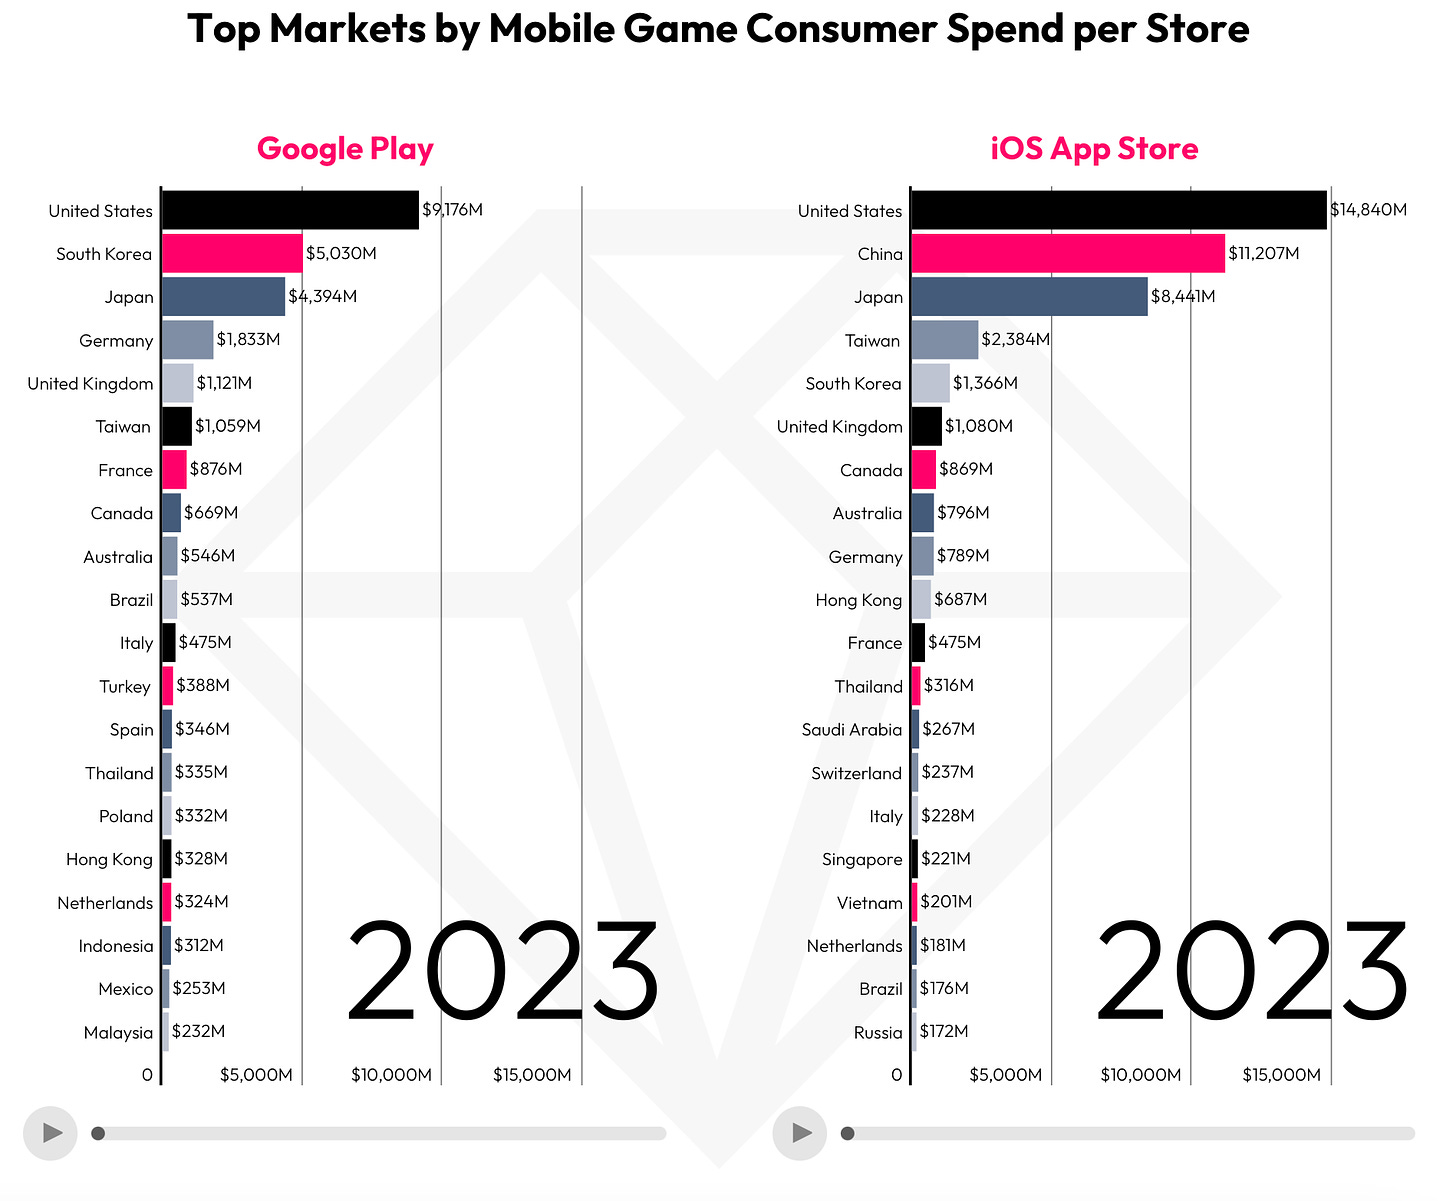 top gaming markets by consumer spend per store